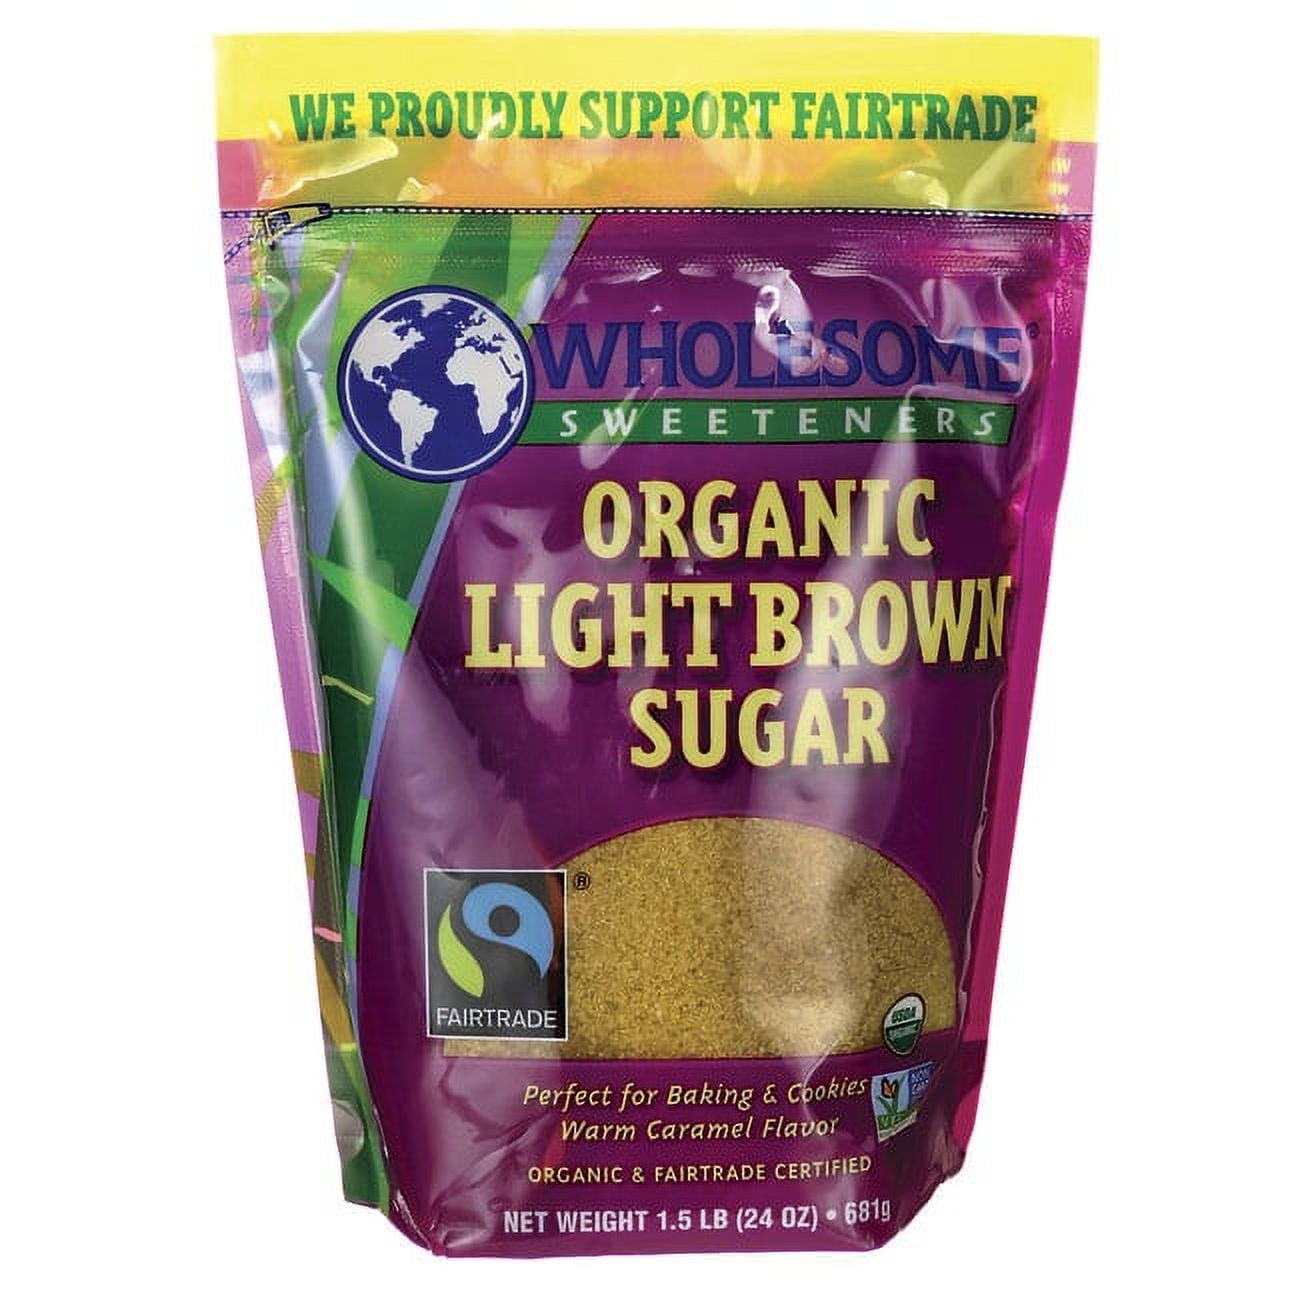 Wholesome Sweeteners Organic Light Brown Sugar 24 Oz Pouch